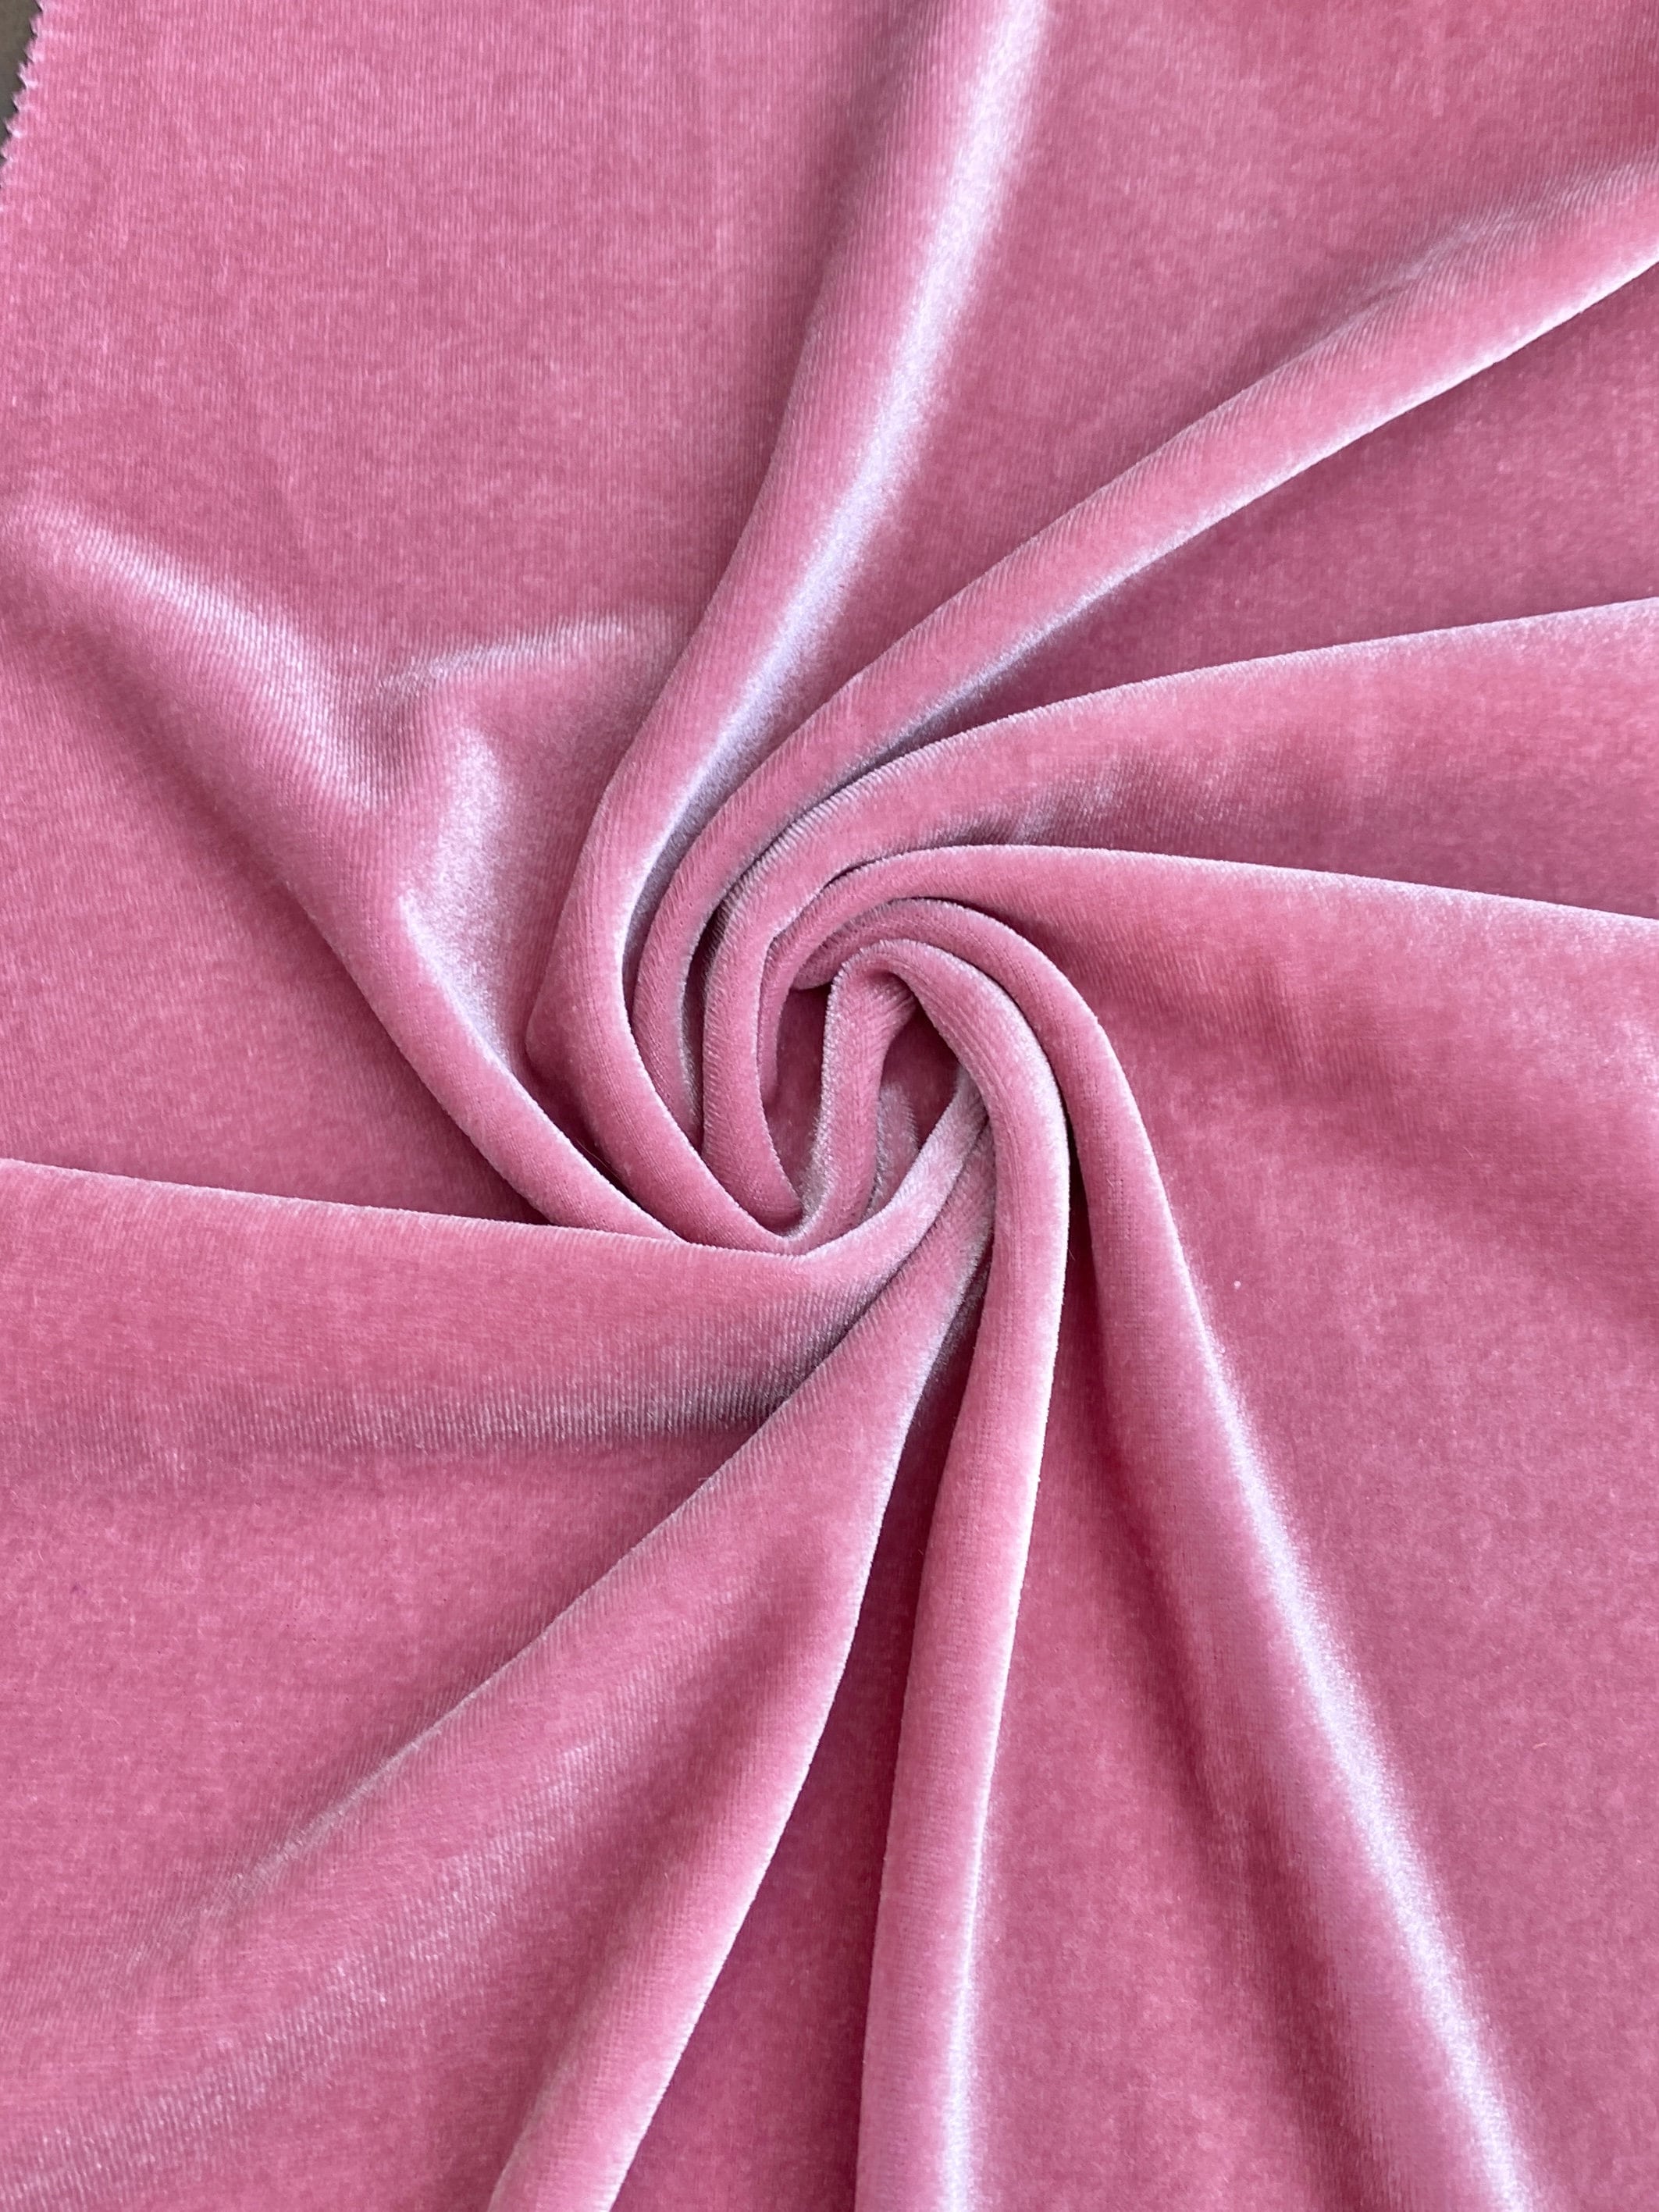 Dusty pink Stretchy Velvet Fabric by The Yard Stretch Fabrics Polyester  Spandex for Scrunchies Clothes Costumes Crafts Bows